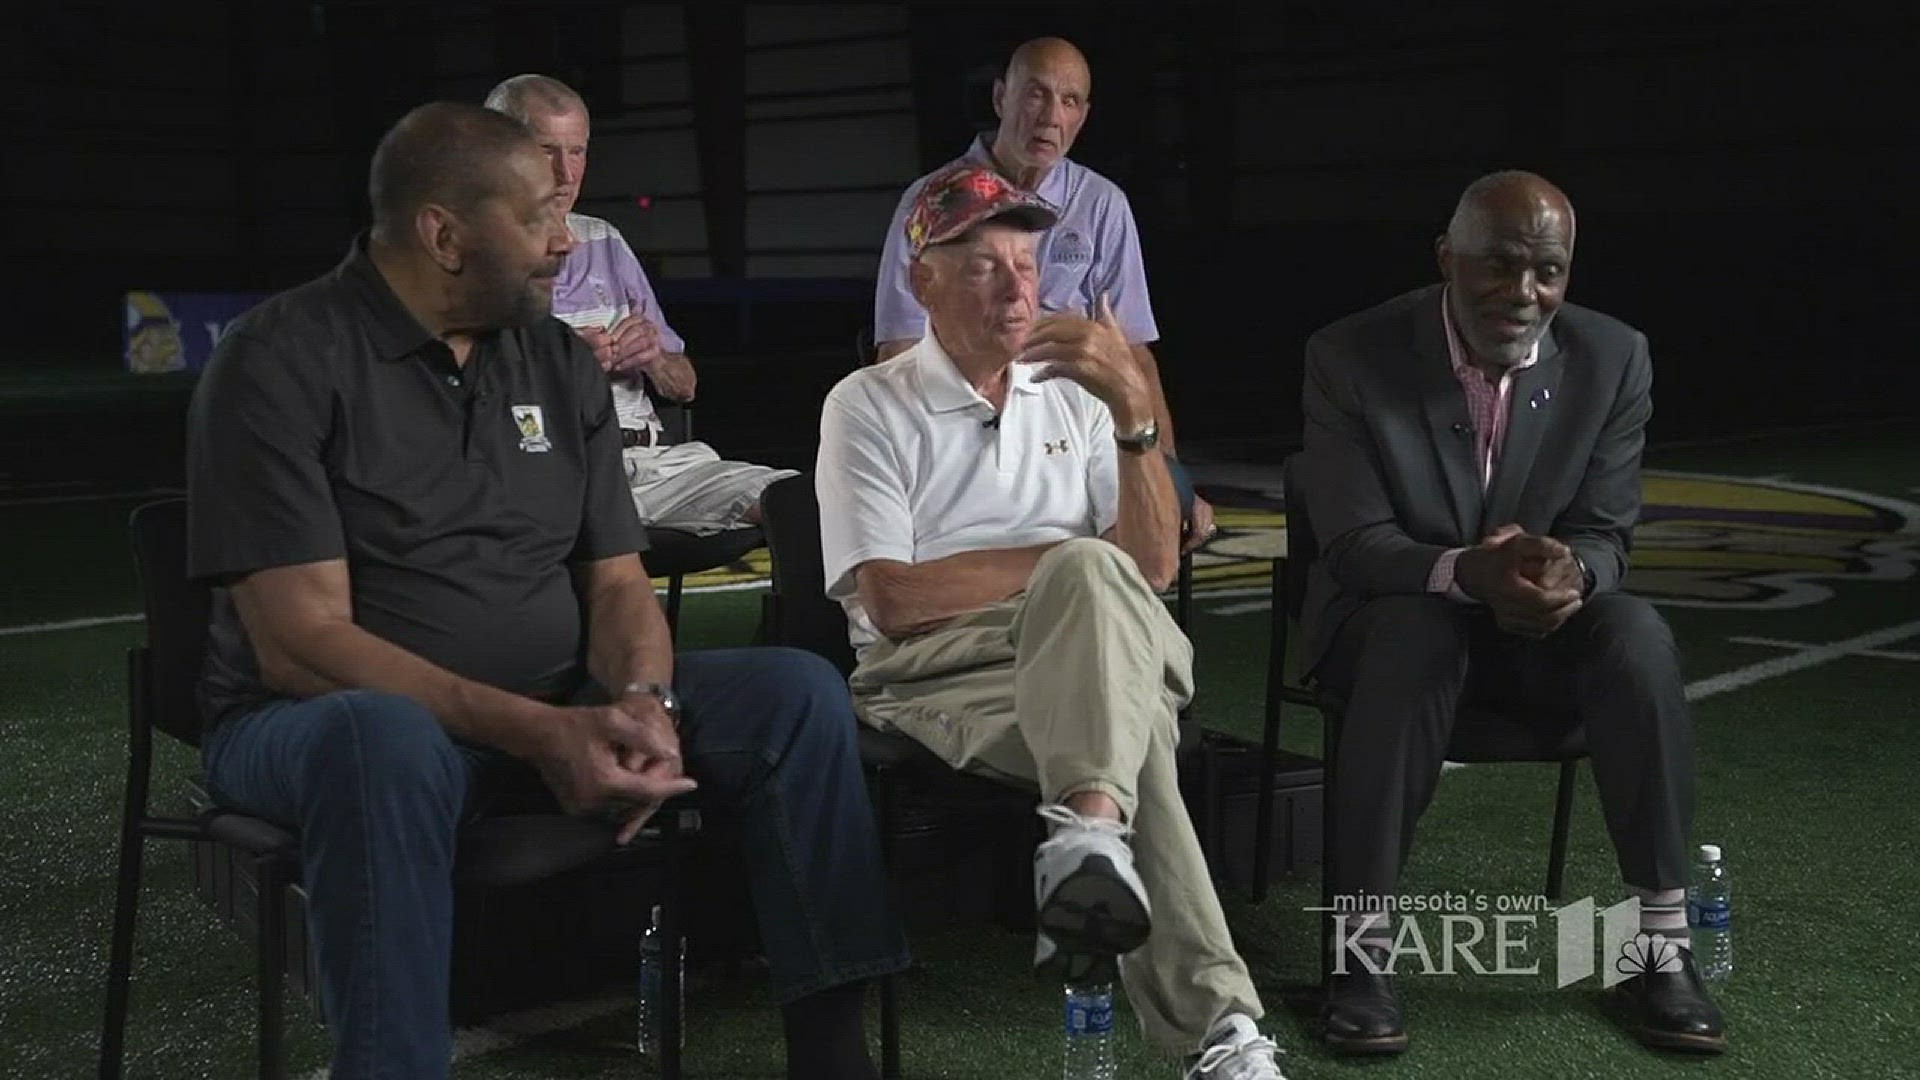 KARE 11's Randy Shaver sits down with Legendary coach Bud Grant, coach Jerry Burns, Alan Page, Jim Marshall and Paul Krause to talk about their memories of summer training camp in Mankato.